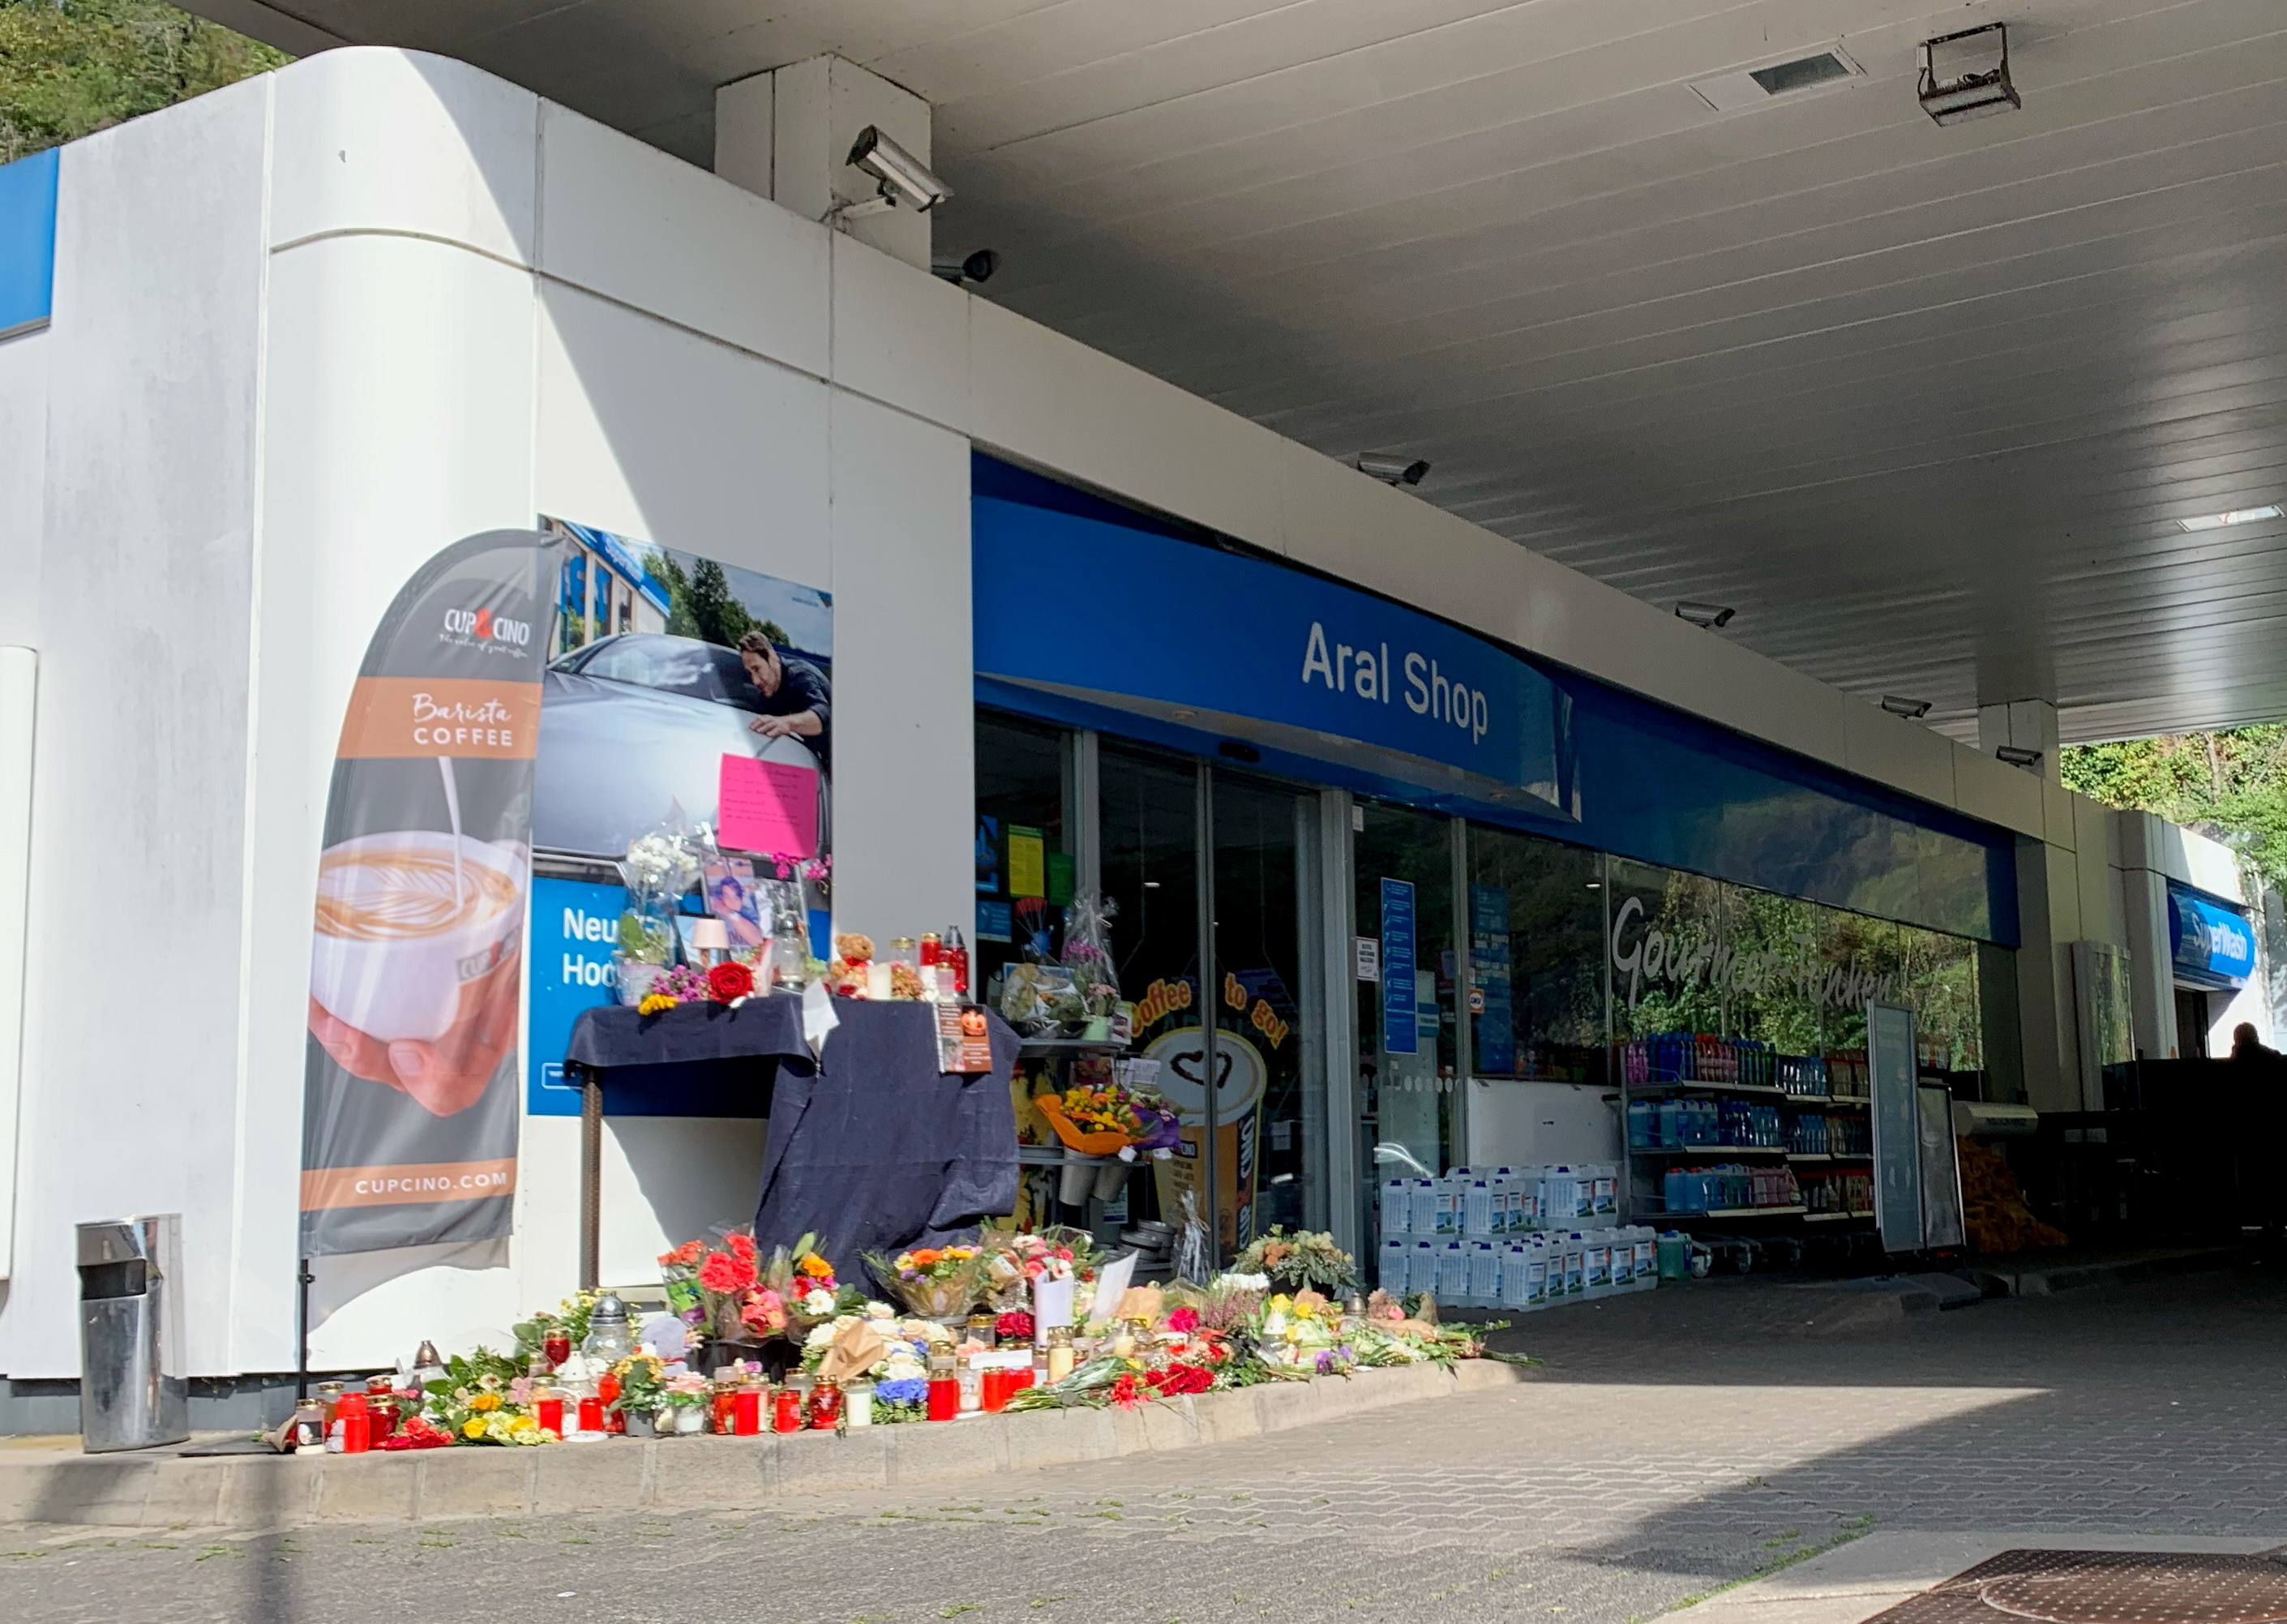 Flowers are placed in front of a gas station in Idar-Oberstein, Germany, September 21, 2021, after a 20-year-old gas station attendant who asked a customer to wear a face mask was shot dead last Saturday, September 18, 2021. REUTERS/Annkathrin Weiss